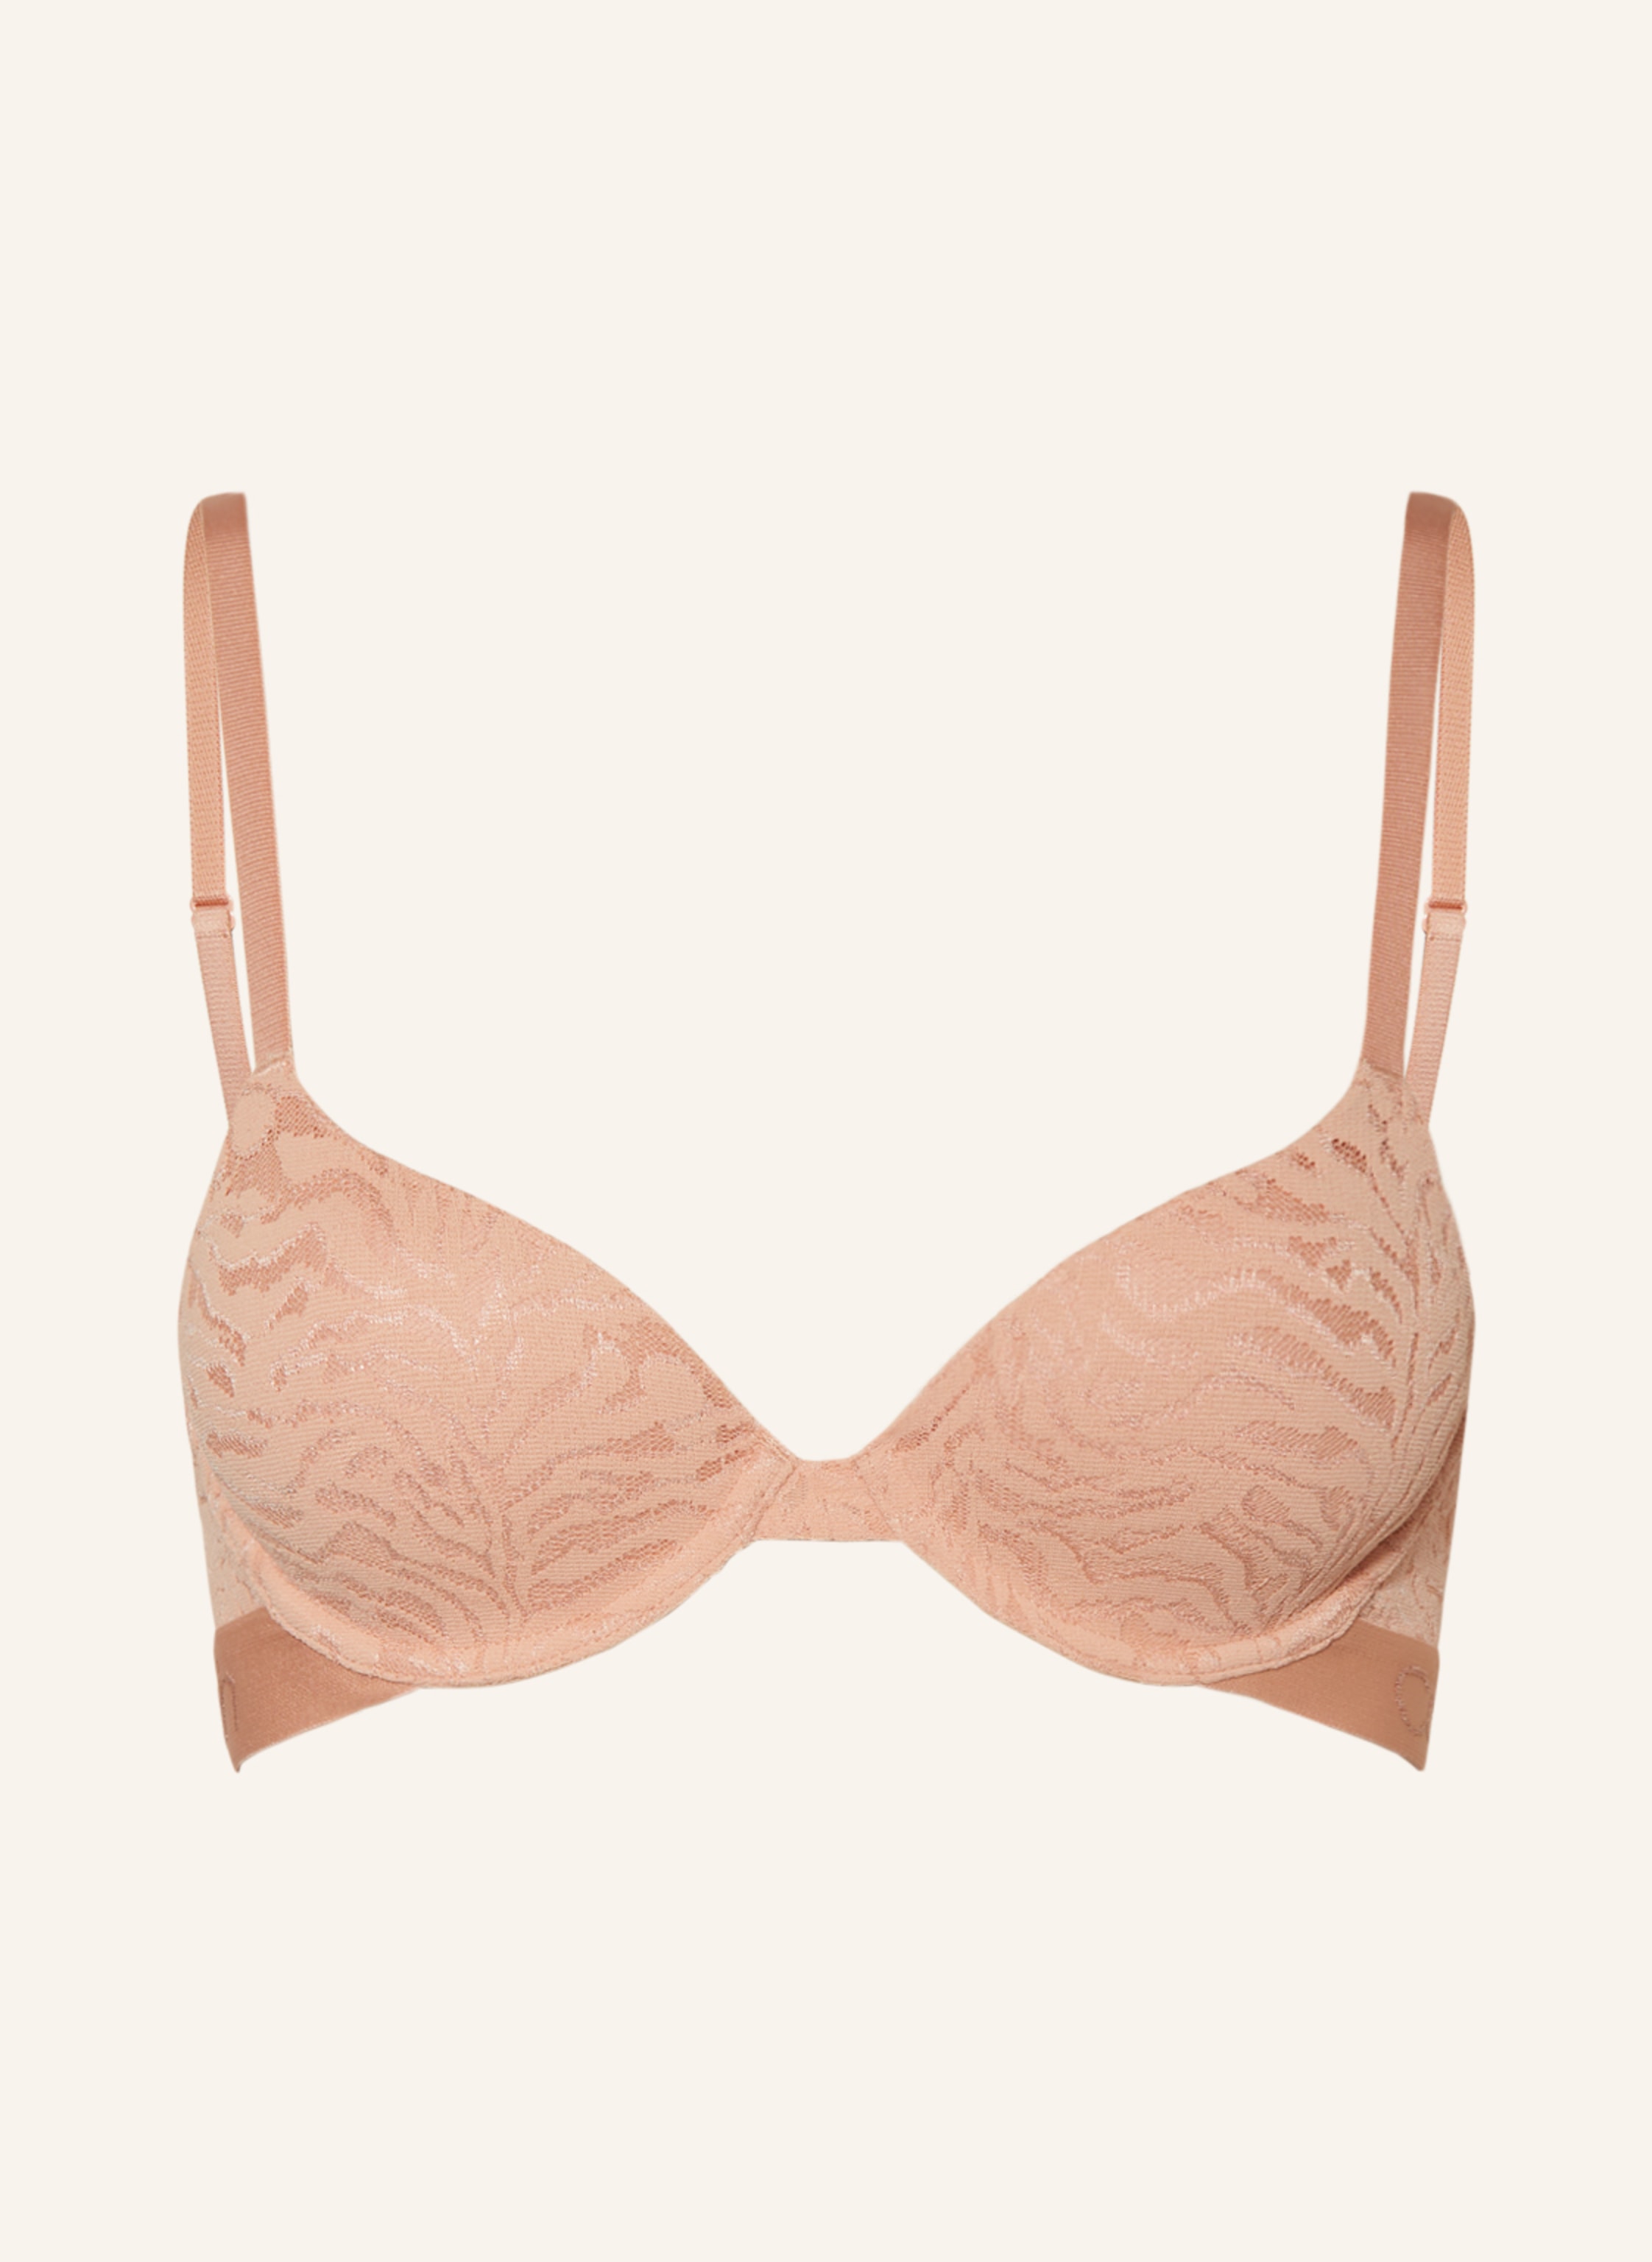 Calvin Klein Molded cup bra INTRINSIC in nude